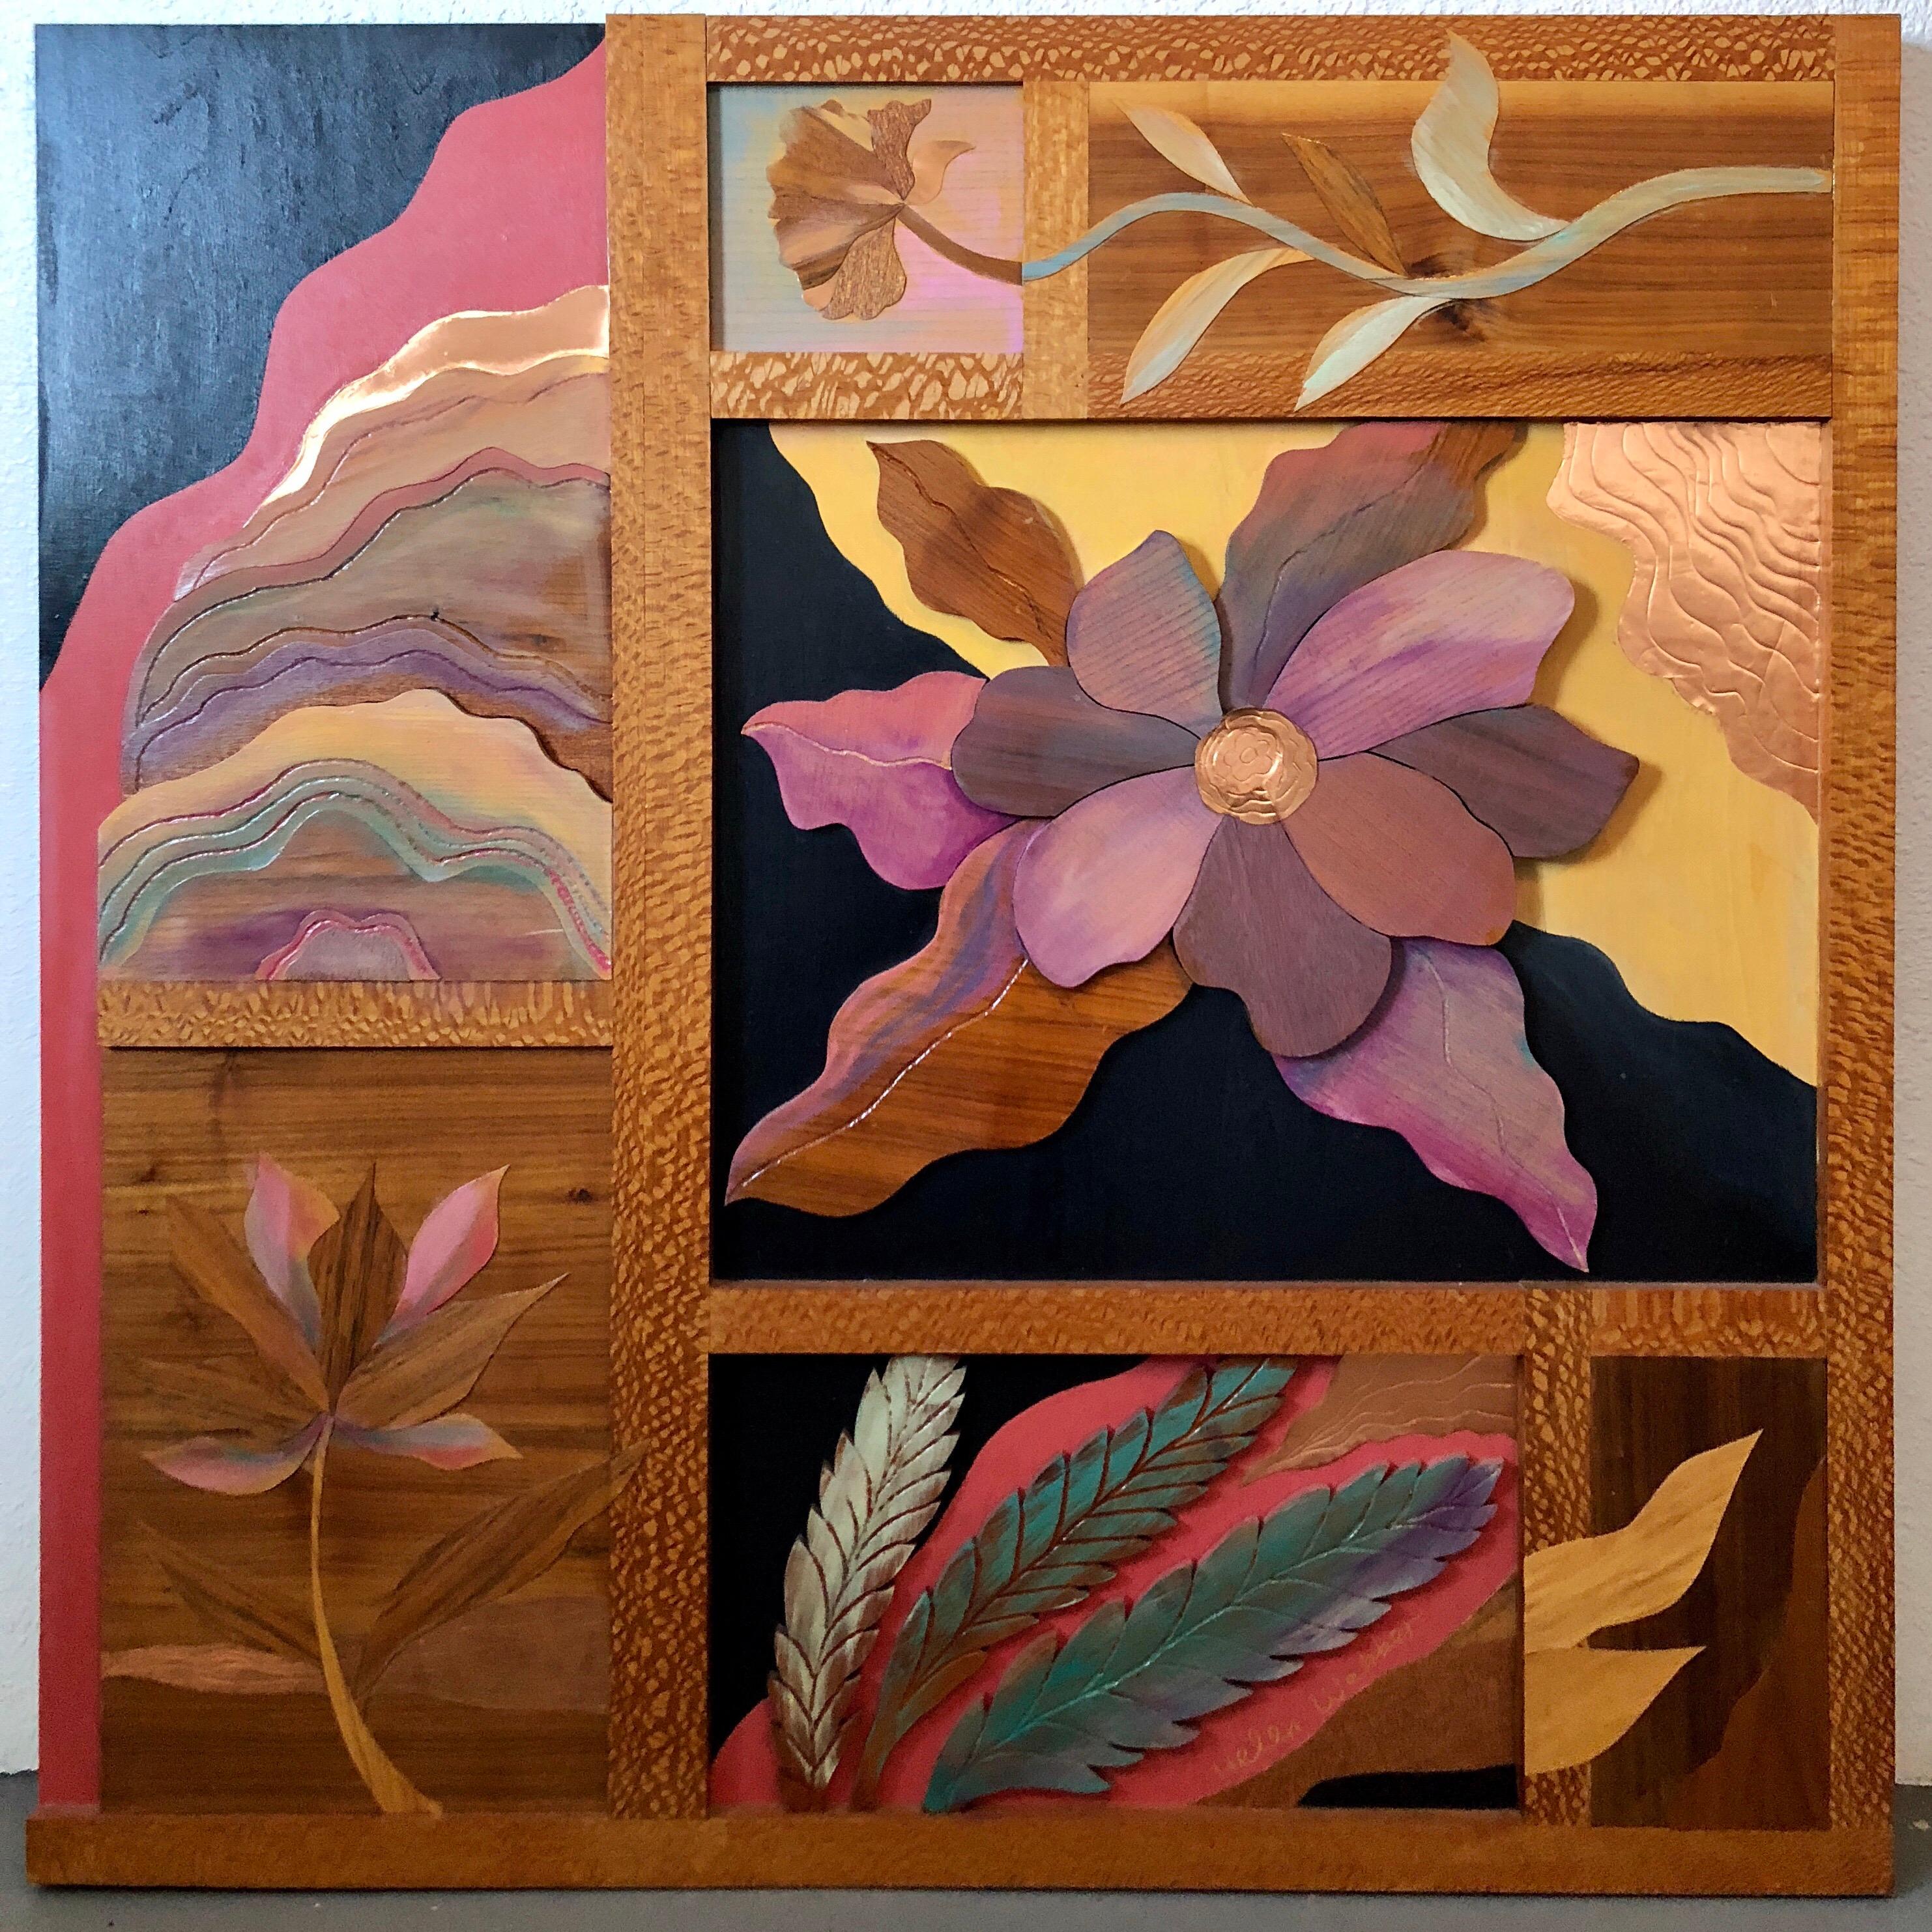 1970s  Large Wood, Copper Inlay Sculpture Wall Relief Tropical Flowers Motif For Sale 5